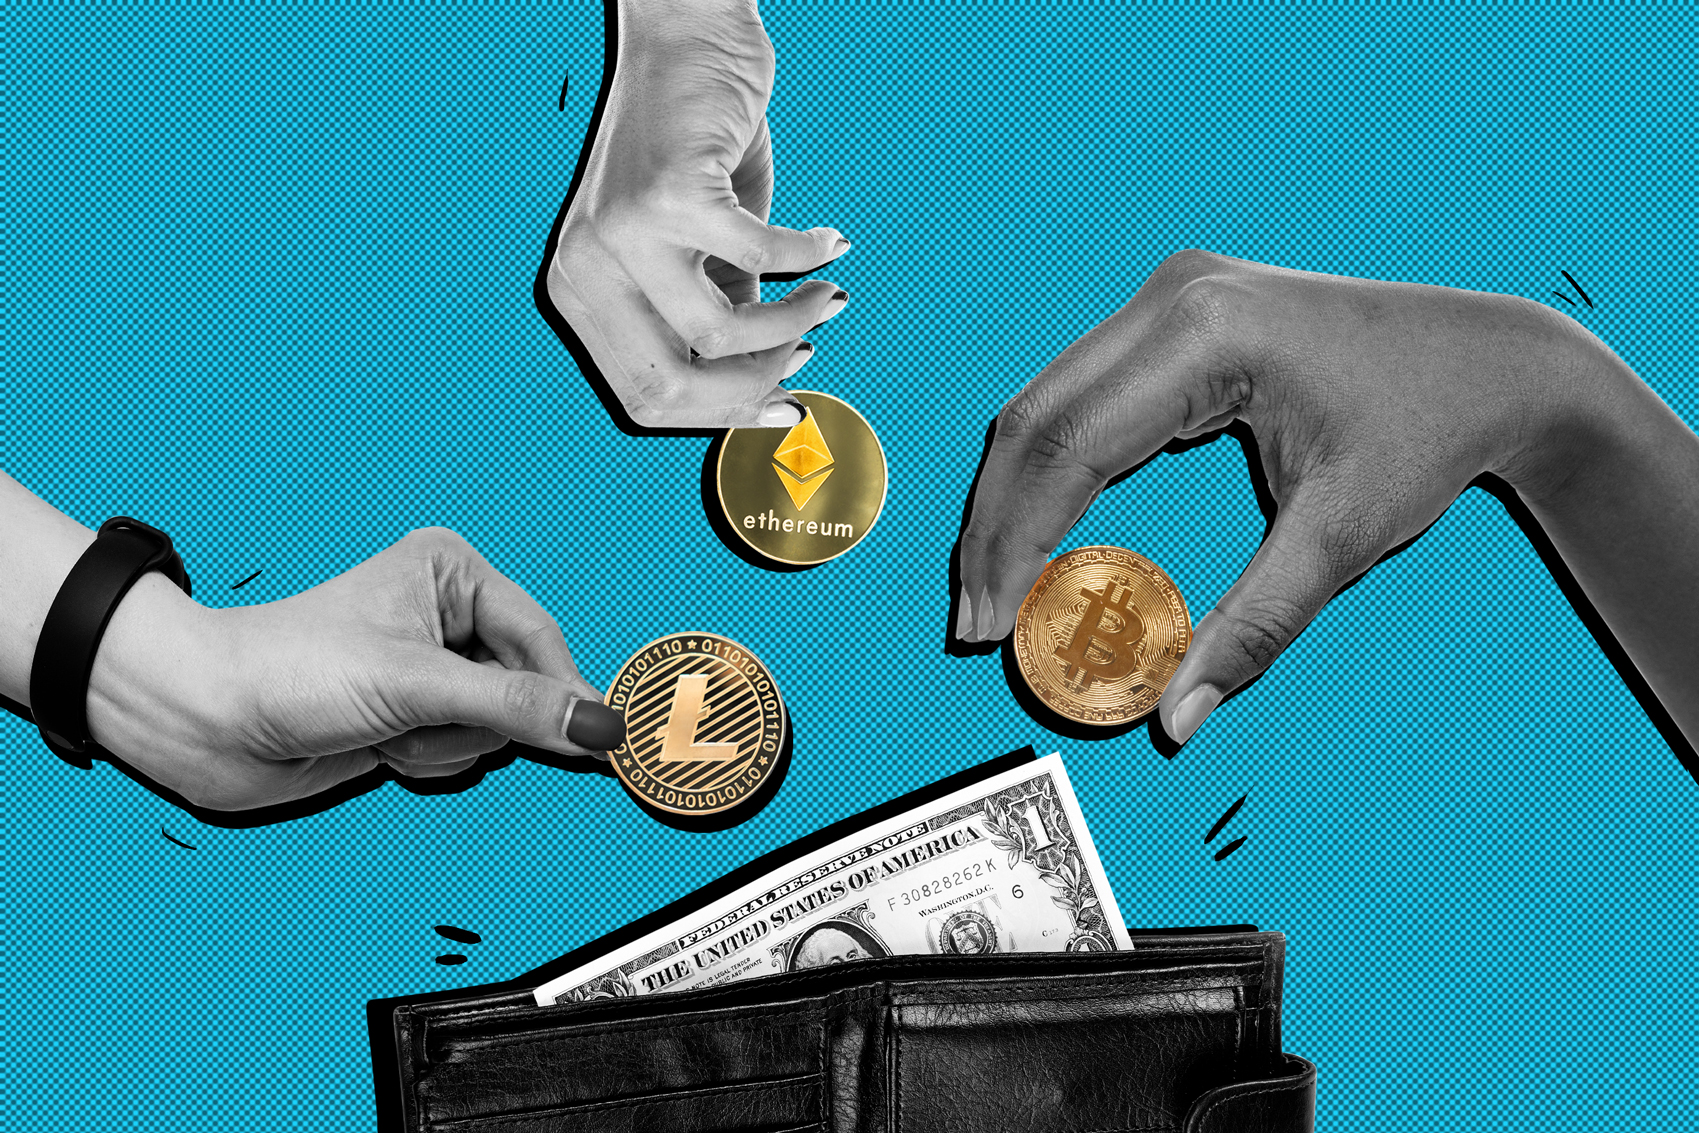 How People Actually Make Money From Cryptocurrencies | WIRED